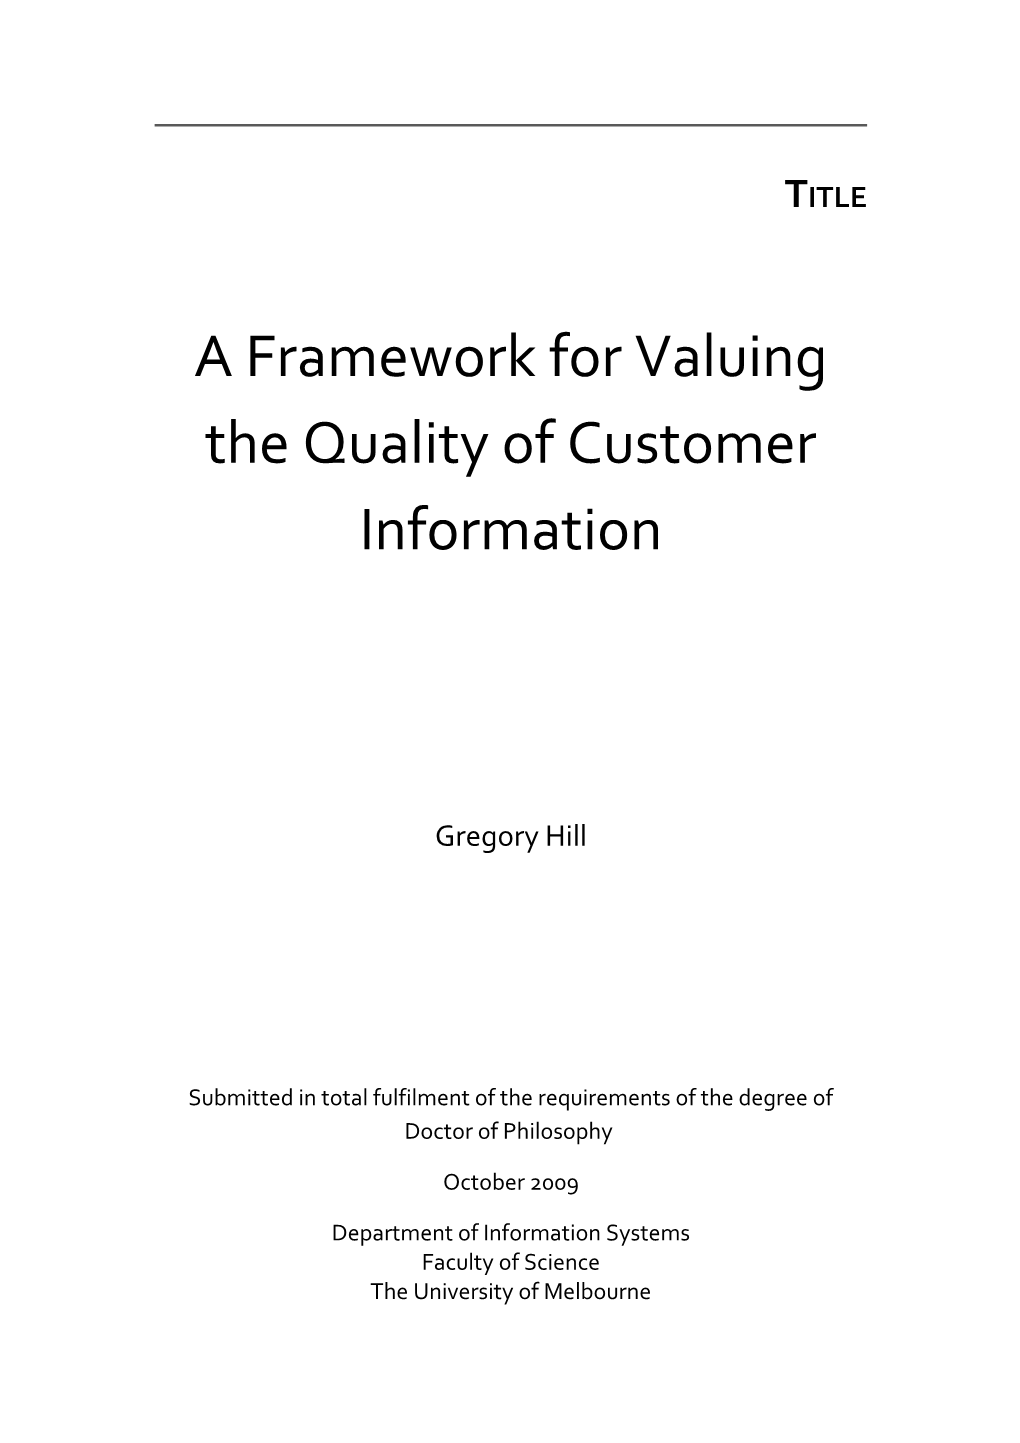 A Framework for Valuing the Quality of Customer Information